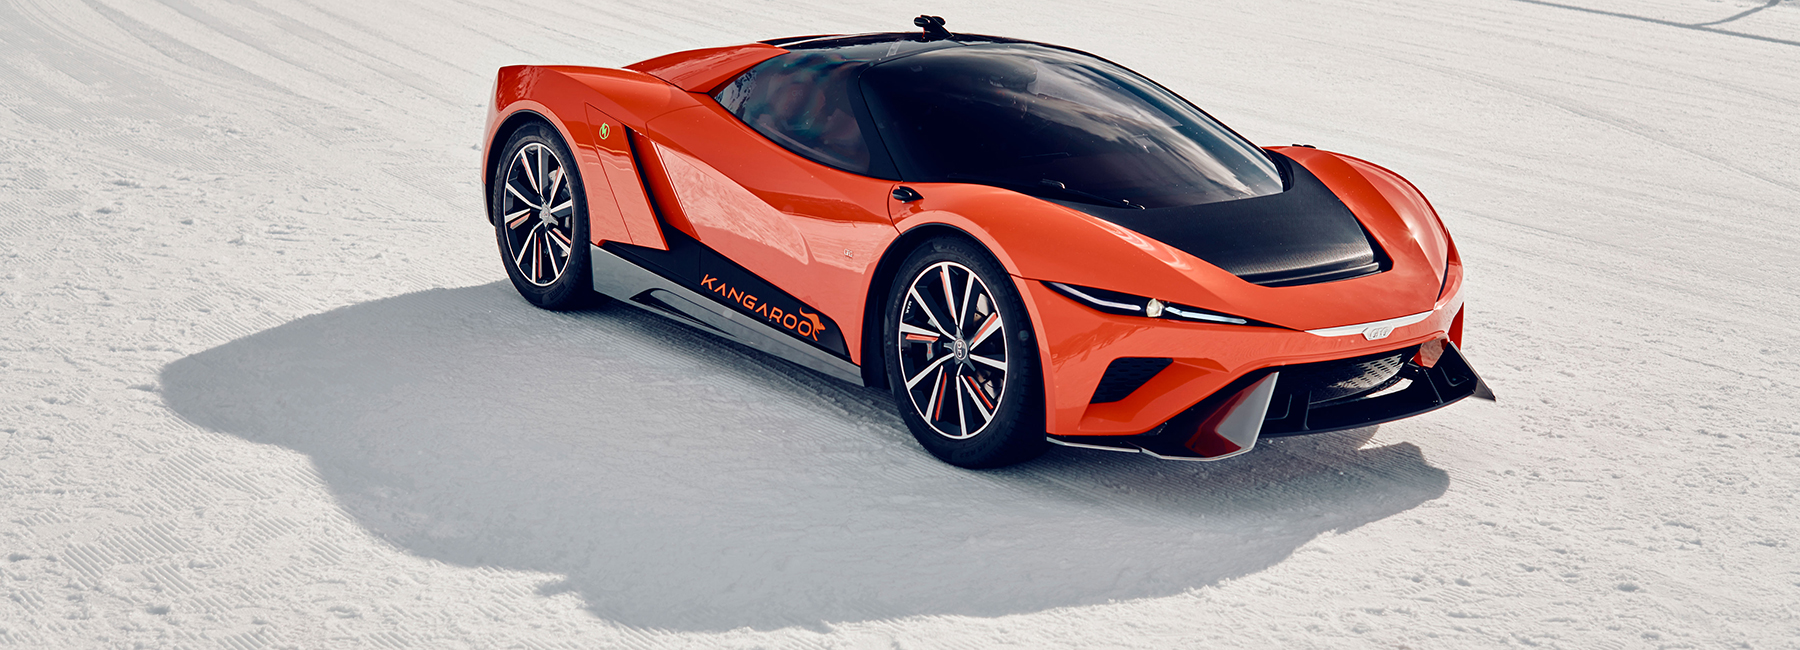 TOP 10 electric concept cars revealed at the 2019 geneva motor show